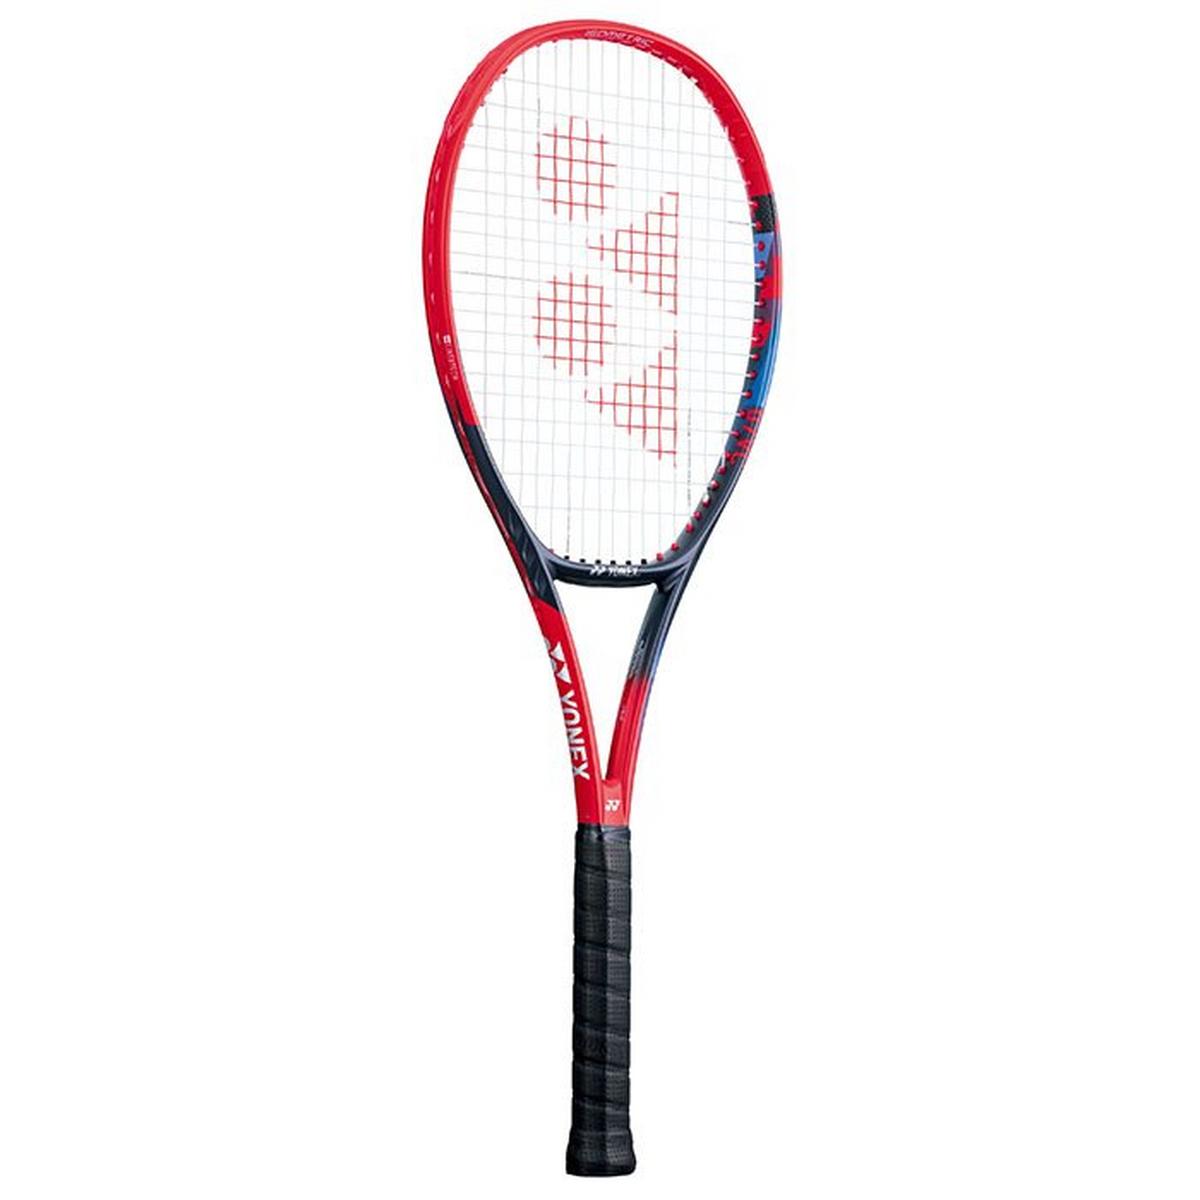 VCORE 95 Tennis Racquet Frame with Free Cover